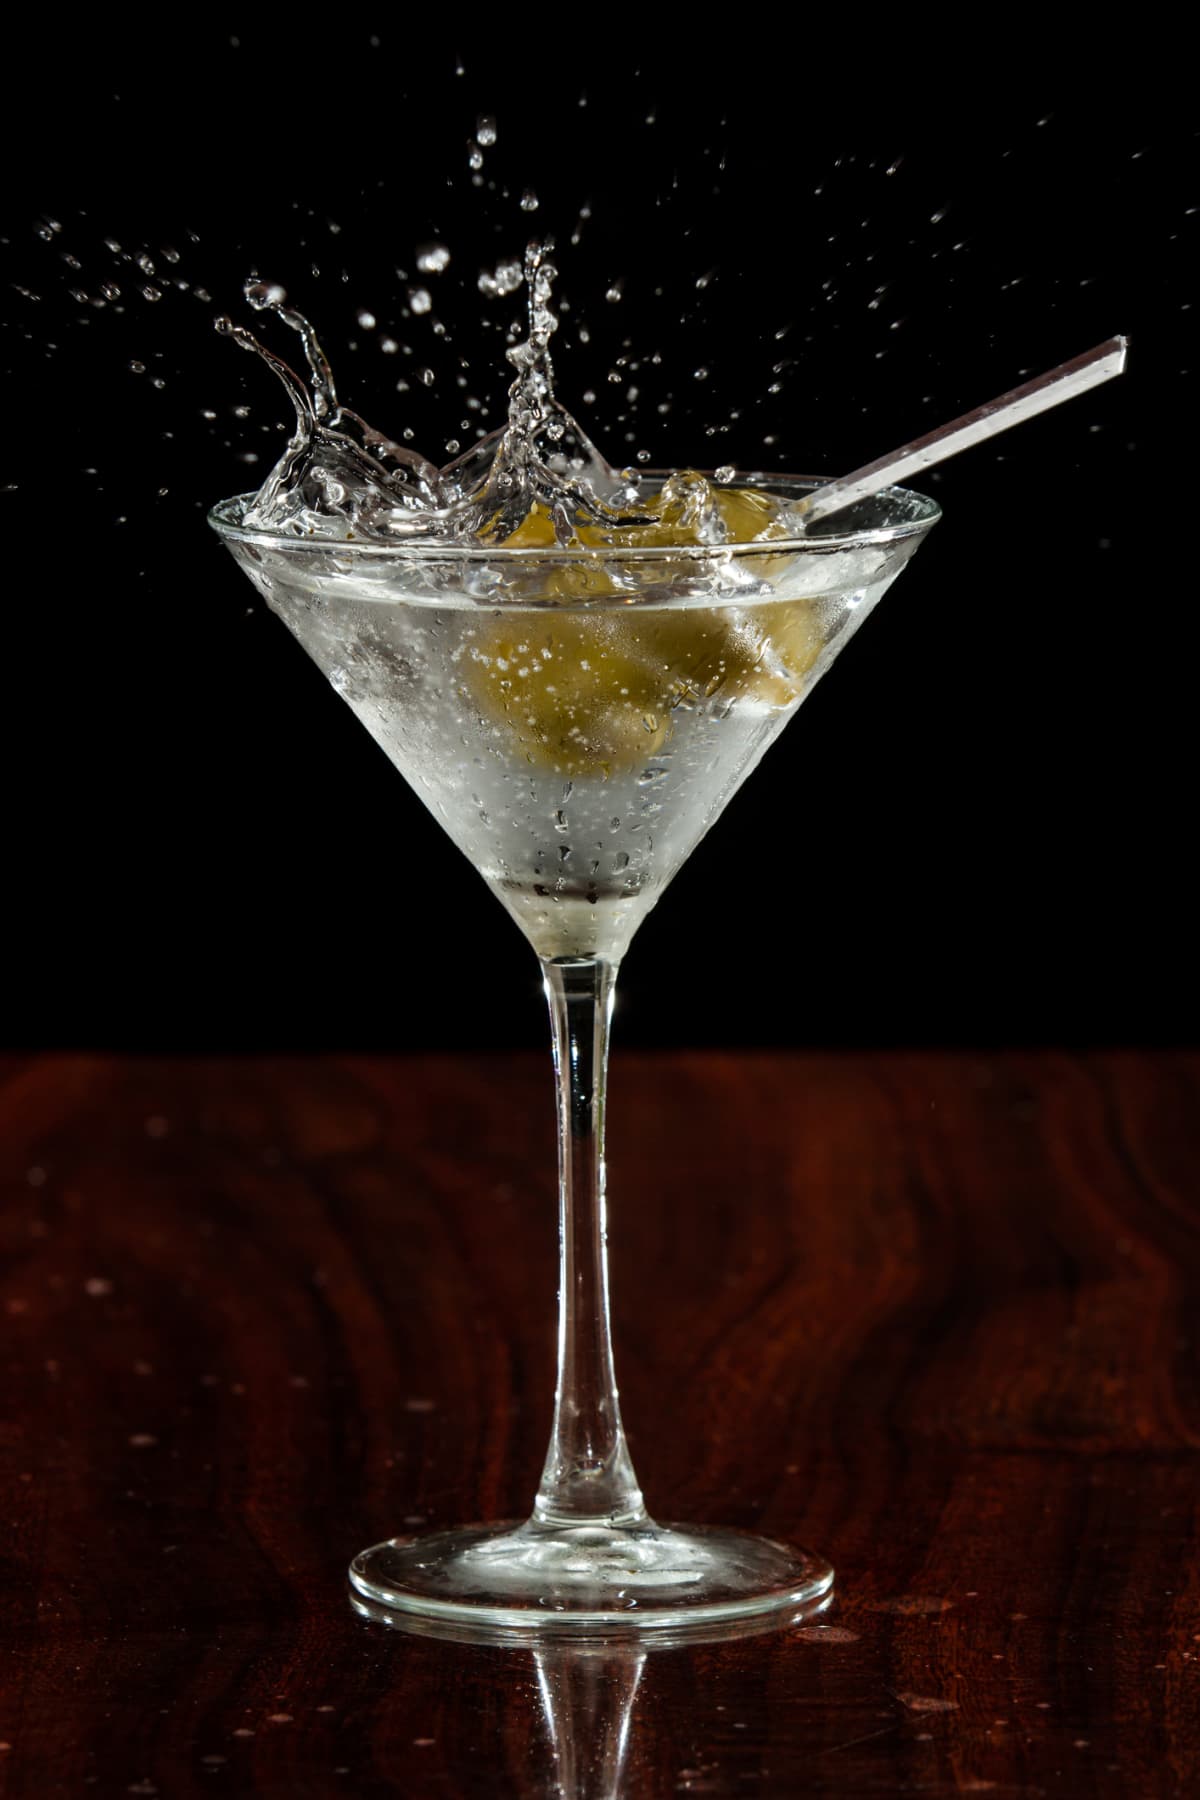 Dirty martini splashing on marble countertop with black background